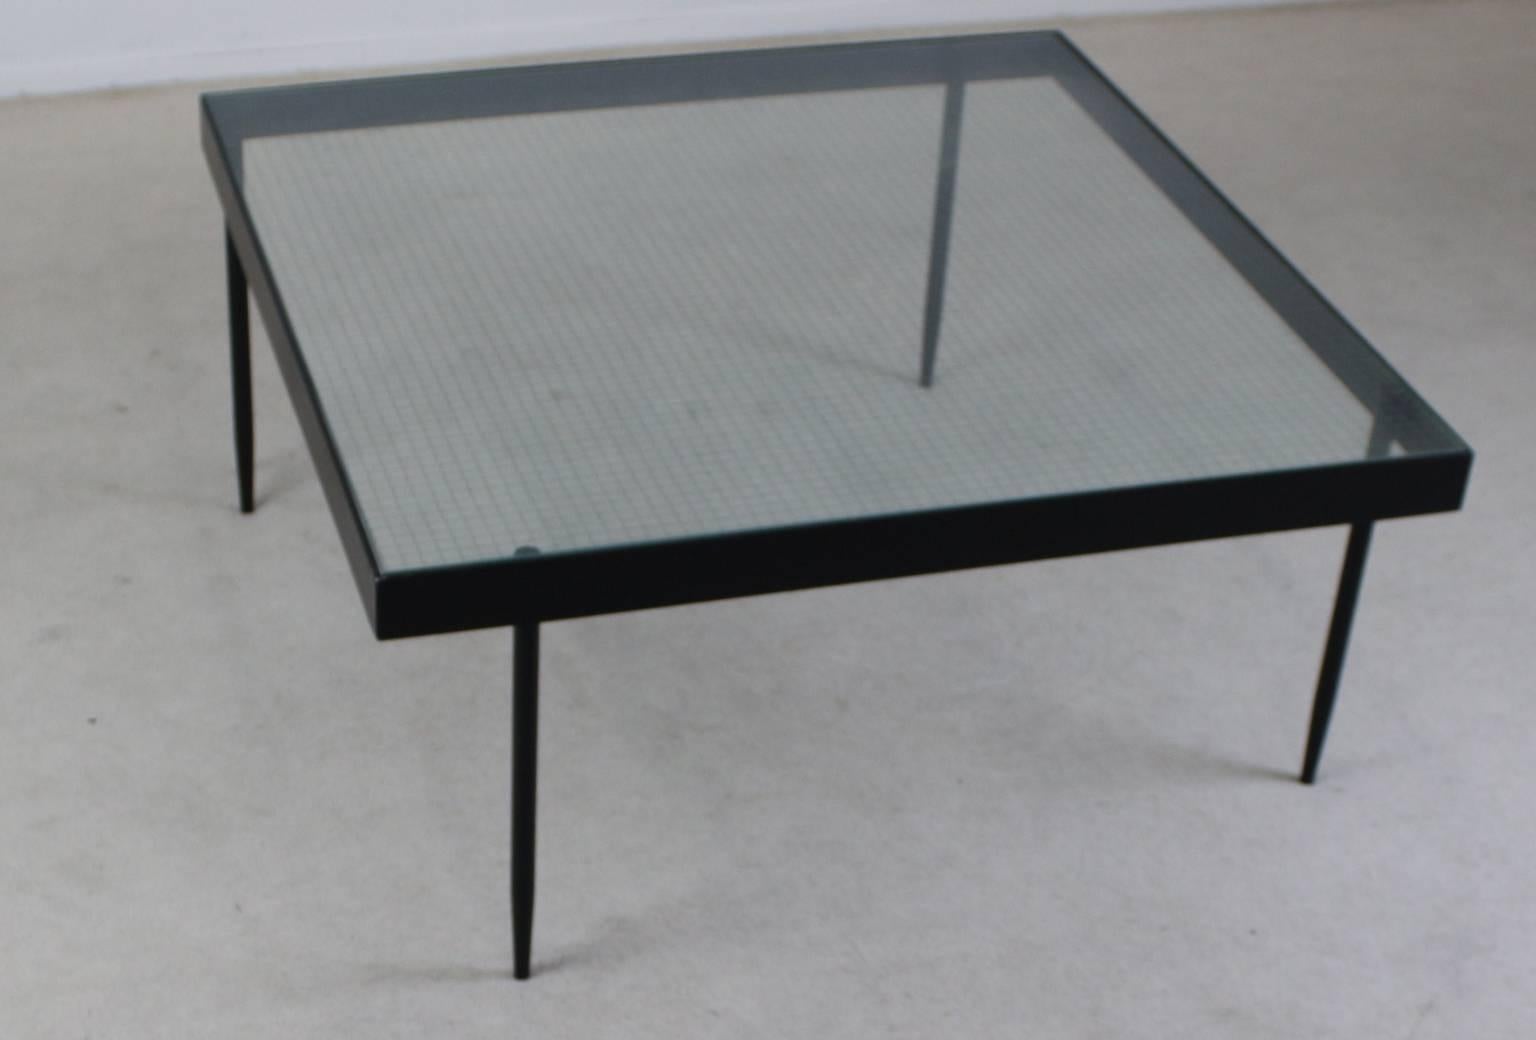 Elegant minimalistic Dutch design.
The legs are not placed on the edge but aside.
Savety glass top.
  